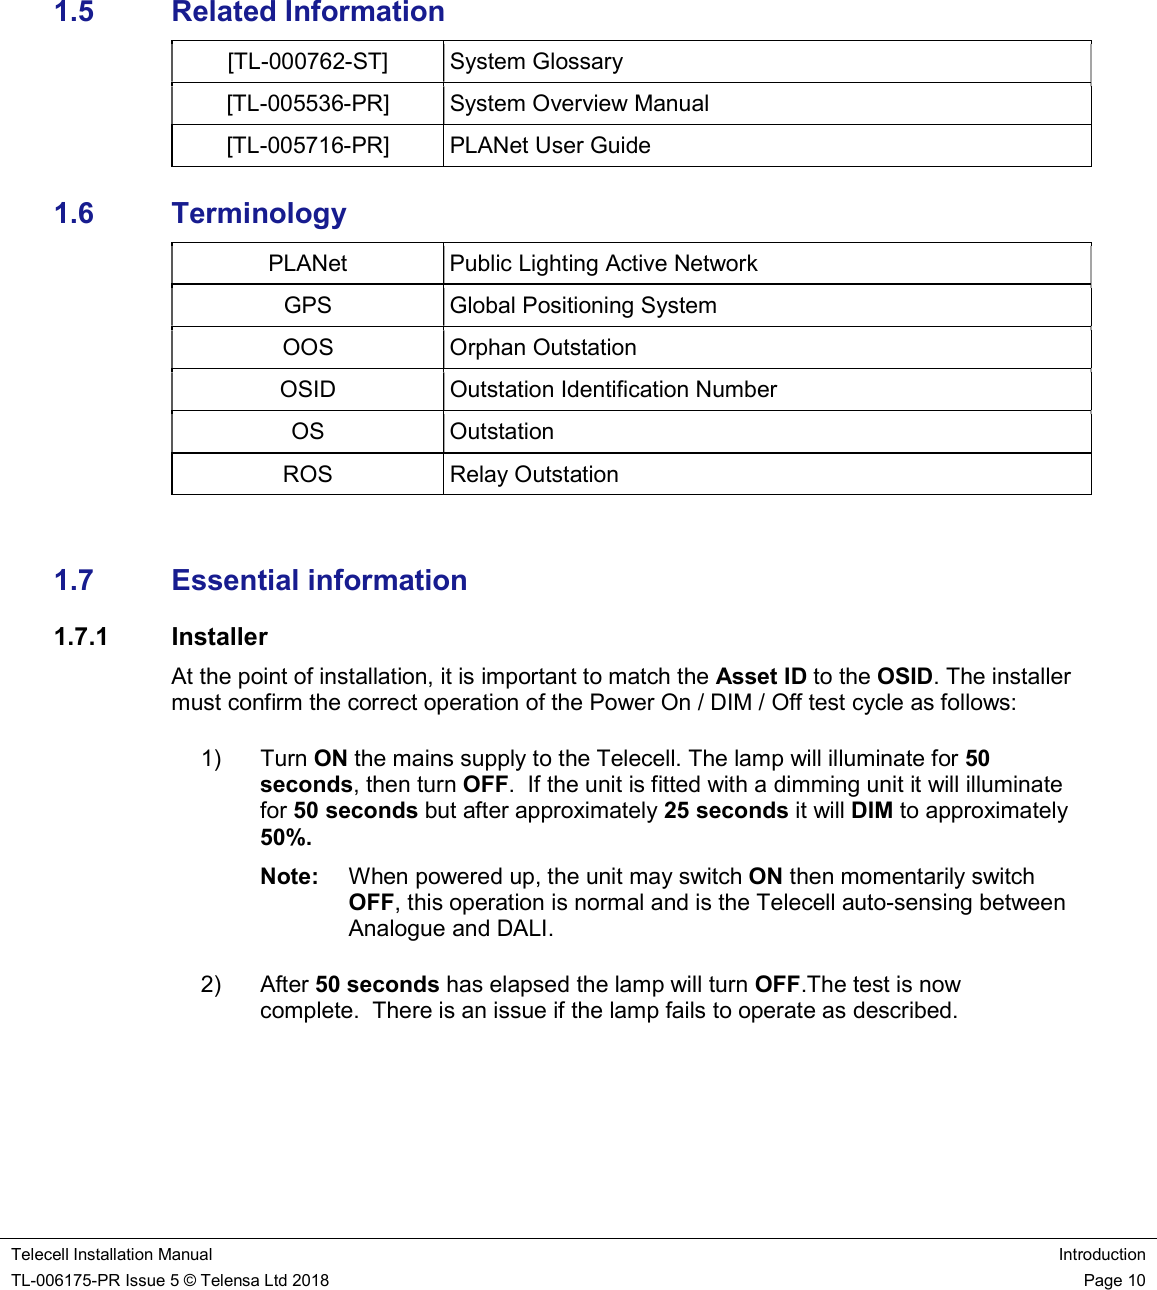    Telecell Installation Manual Introduction TL-006175-PR Issue 5 © Telensa Ltd 2018    Page 10       1.5  Related Information [TL-000762-ST]  System Glossary  [TL-005536-PR]  System Overview Manual  [TL-005716-PR]  PLANet User Guide 1.6  Terminology PLANet  Public Lighting Active Network GPS  Global Positioning System OOS  Orphan Outstation OSID  Outstation Identification Number OS  Outstation ROS  Relay Outstation  1.7  Essential information 1.7.1  Installer At the point of installation, it is important to match the Asset ID to the OSID. The installer must confirm the correct operation of the Power On / DIM / Off test cycle as follows: 1)  Turn ON the mains supply to the Telecell. The lamp will illuminate for 50 seconds, then turn OFF.  If the unit is fitted with a dimming unit it will illuminate for 50 seconds but after approximately 25 seconds it will DIM to approximately 50%. Note:  When powered up, the unit may switch ON then momentarily switch OFF, this operation is normal and is the Telecell auto-sensing between Analogue and DALI. 2)  After 50 seconds has elapsed the lamp will turn OFF.The test is now complete.  There is an issue if the lamp fails to operate as described.  